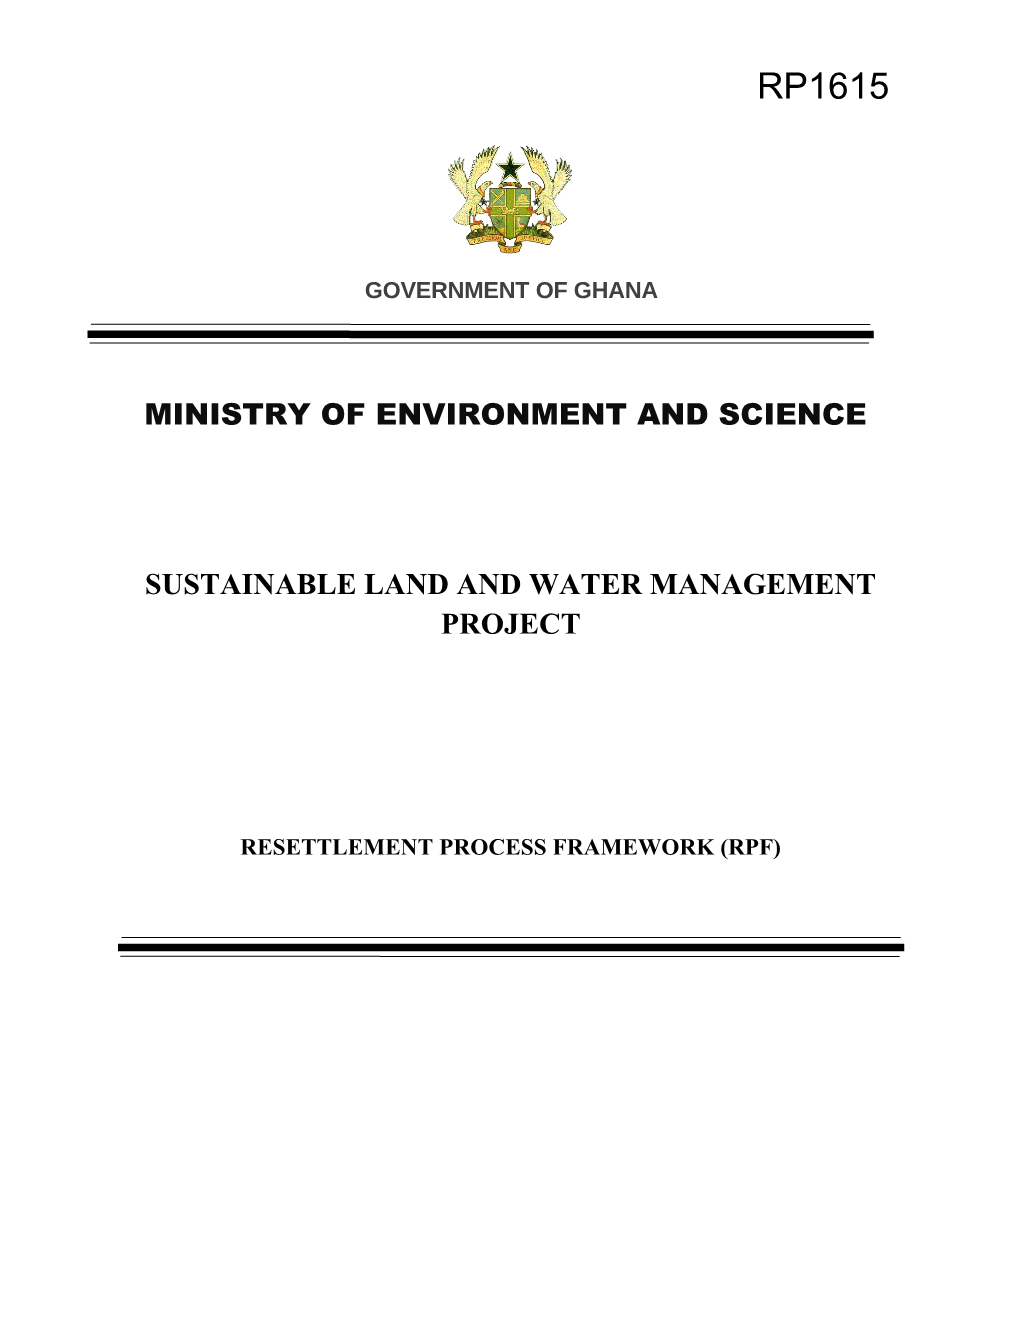 Sustainable Land and Water Management Project